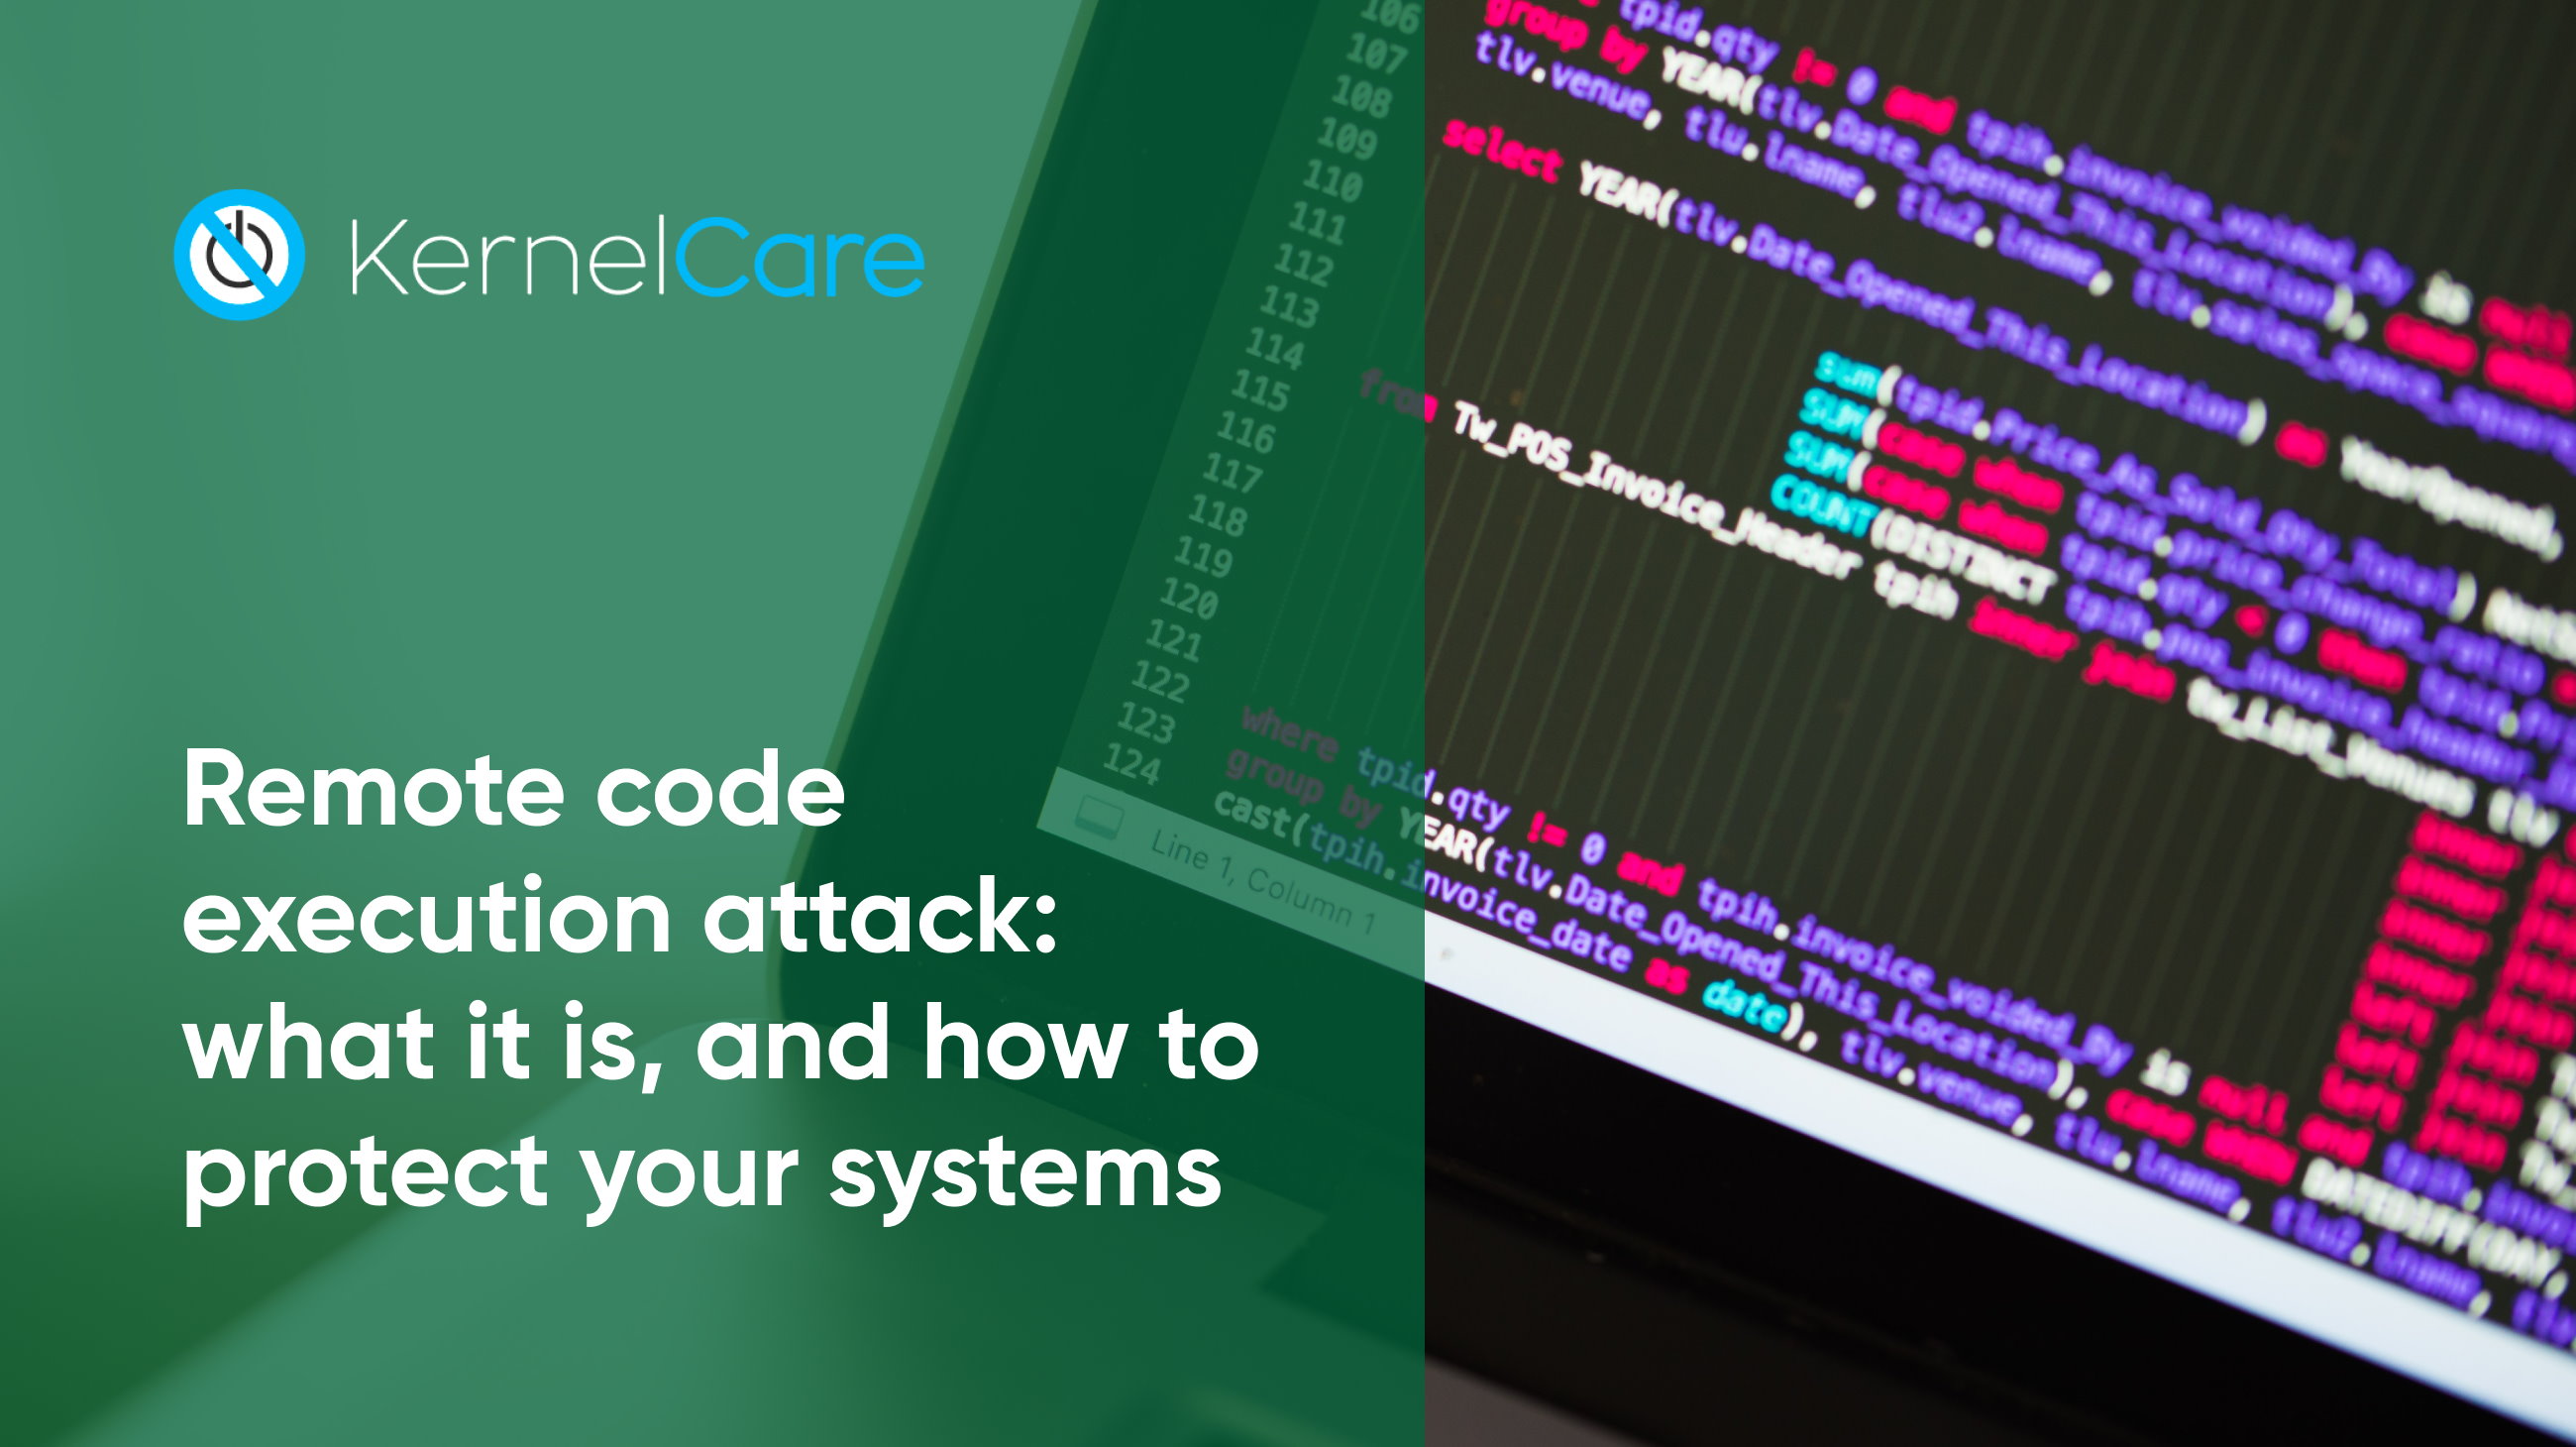 Remote code execution attack: what it is and how to protect your systems